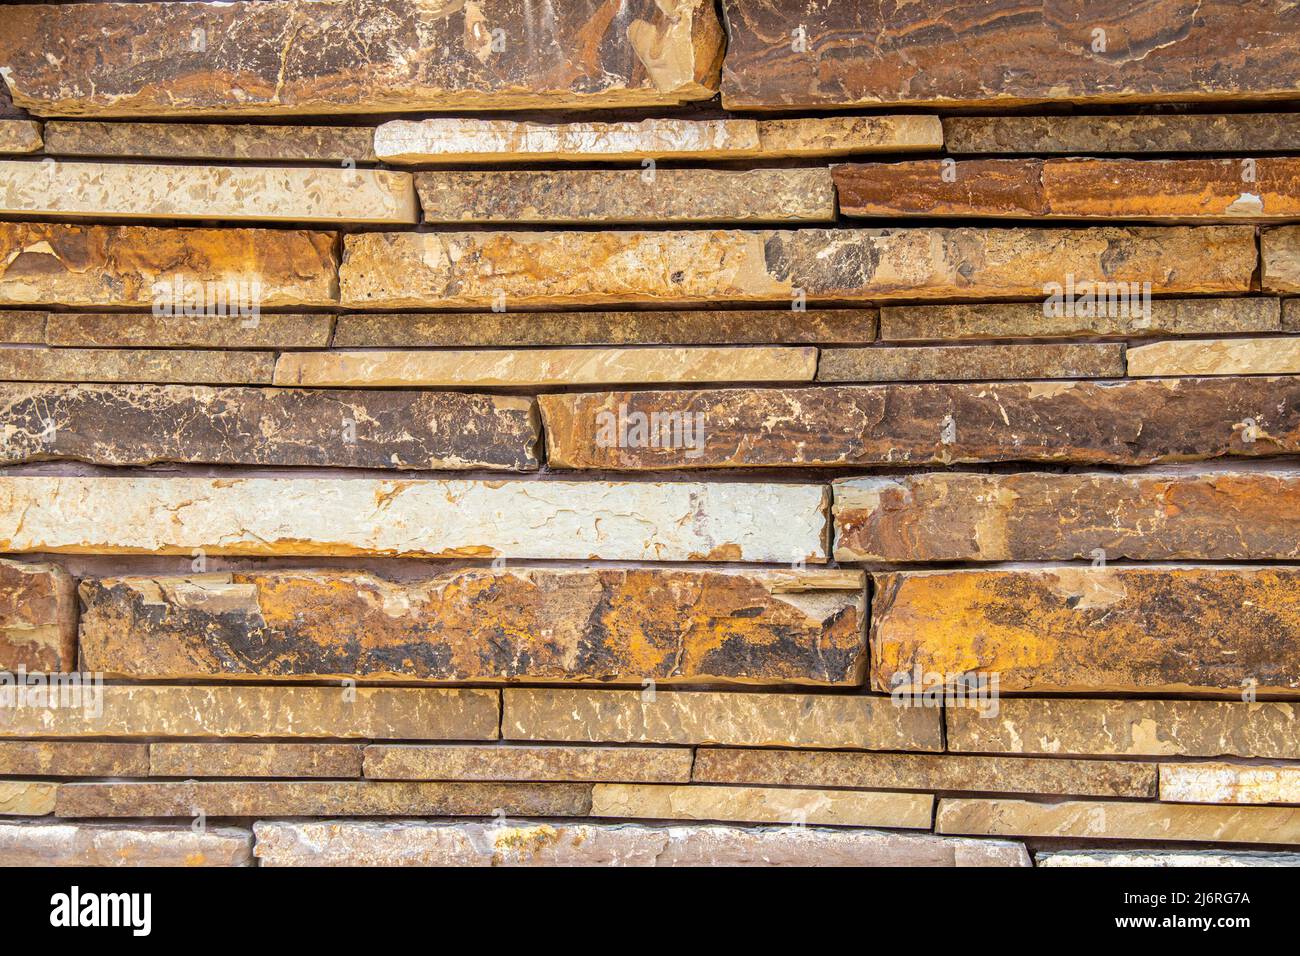 Dry stacked stone wall made of large slabs of colorful sandstone background Stock Photo